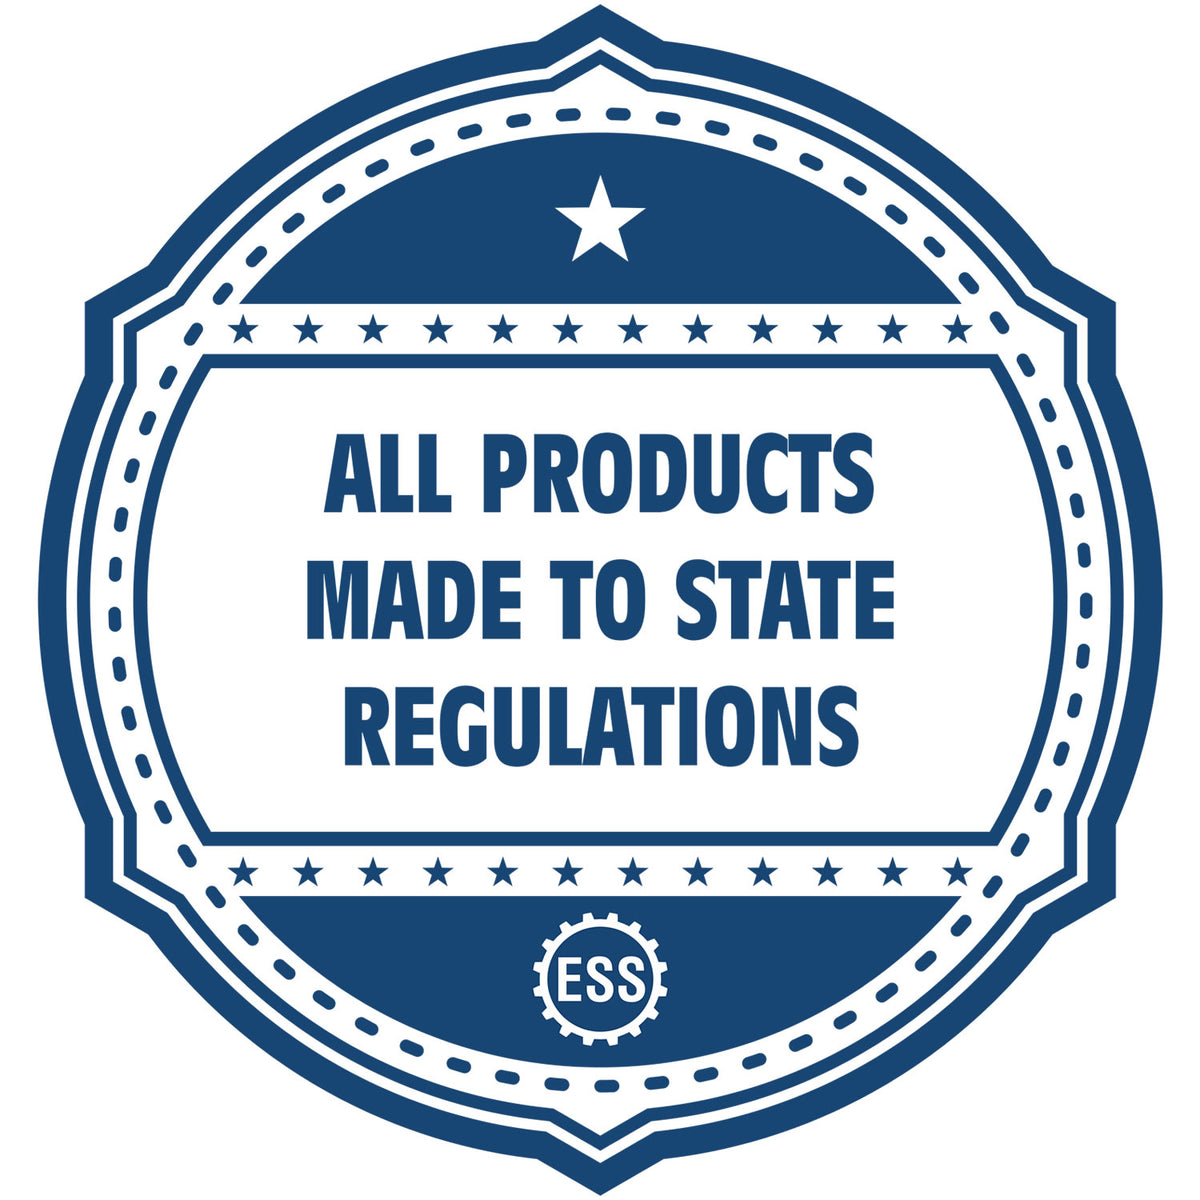 An icon or badge element for the Wooden Handle Virginia State Seal Notary Public Stamp showing that this product is made in compliance with state regulations.